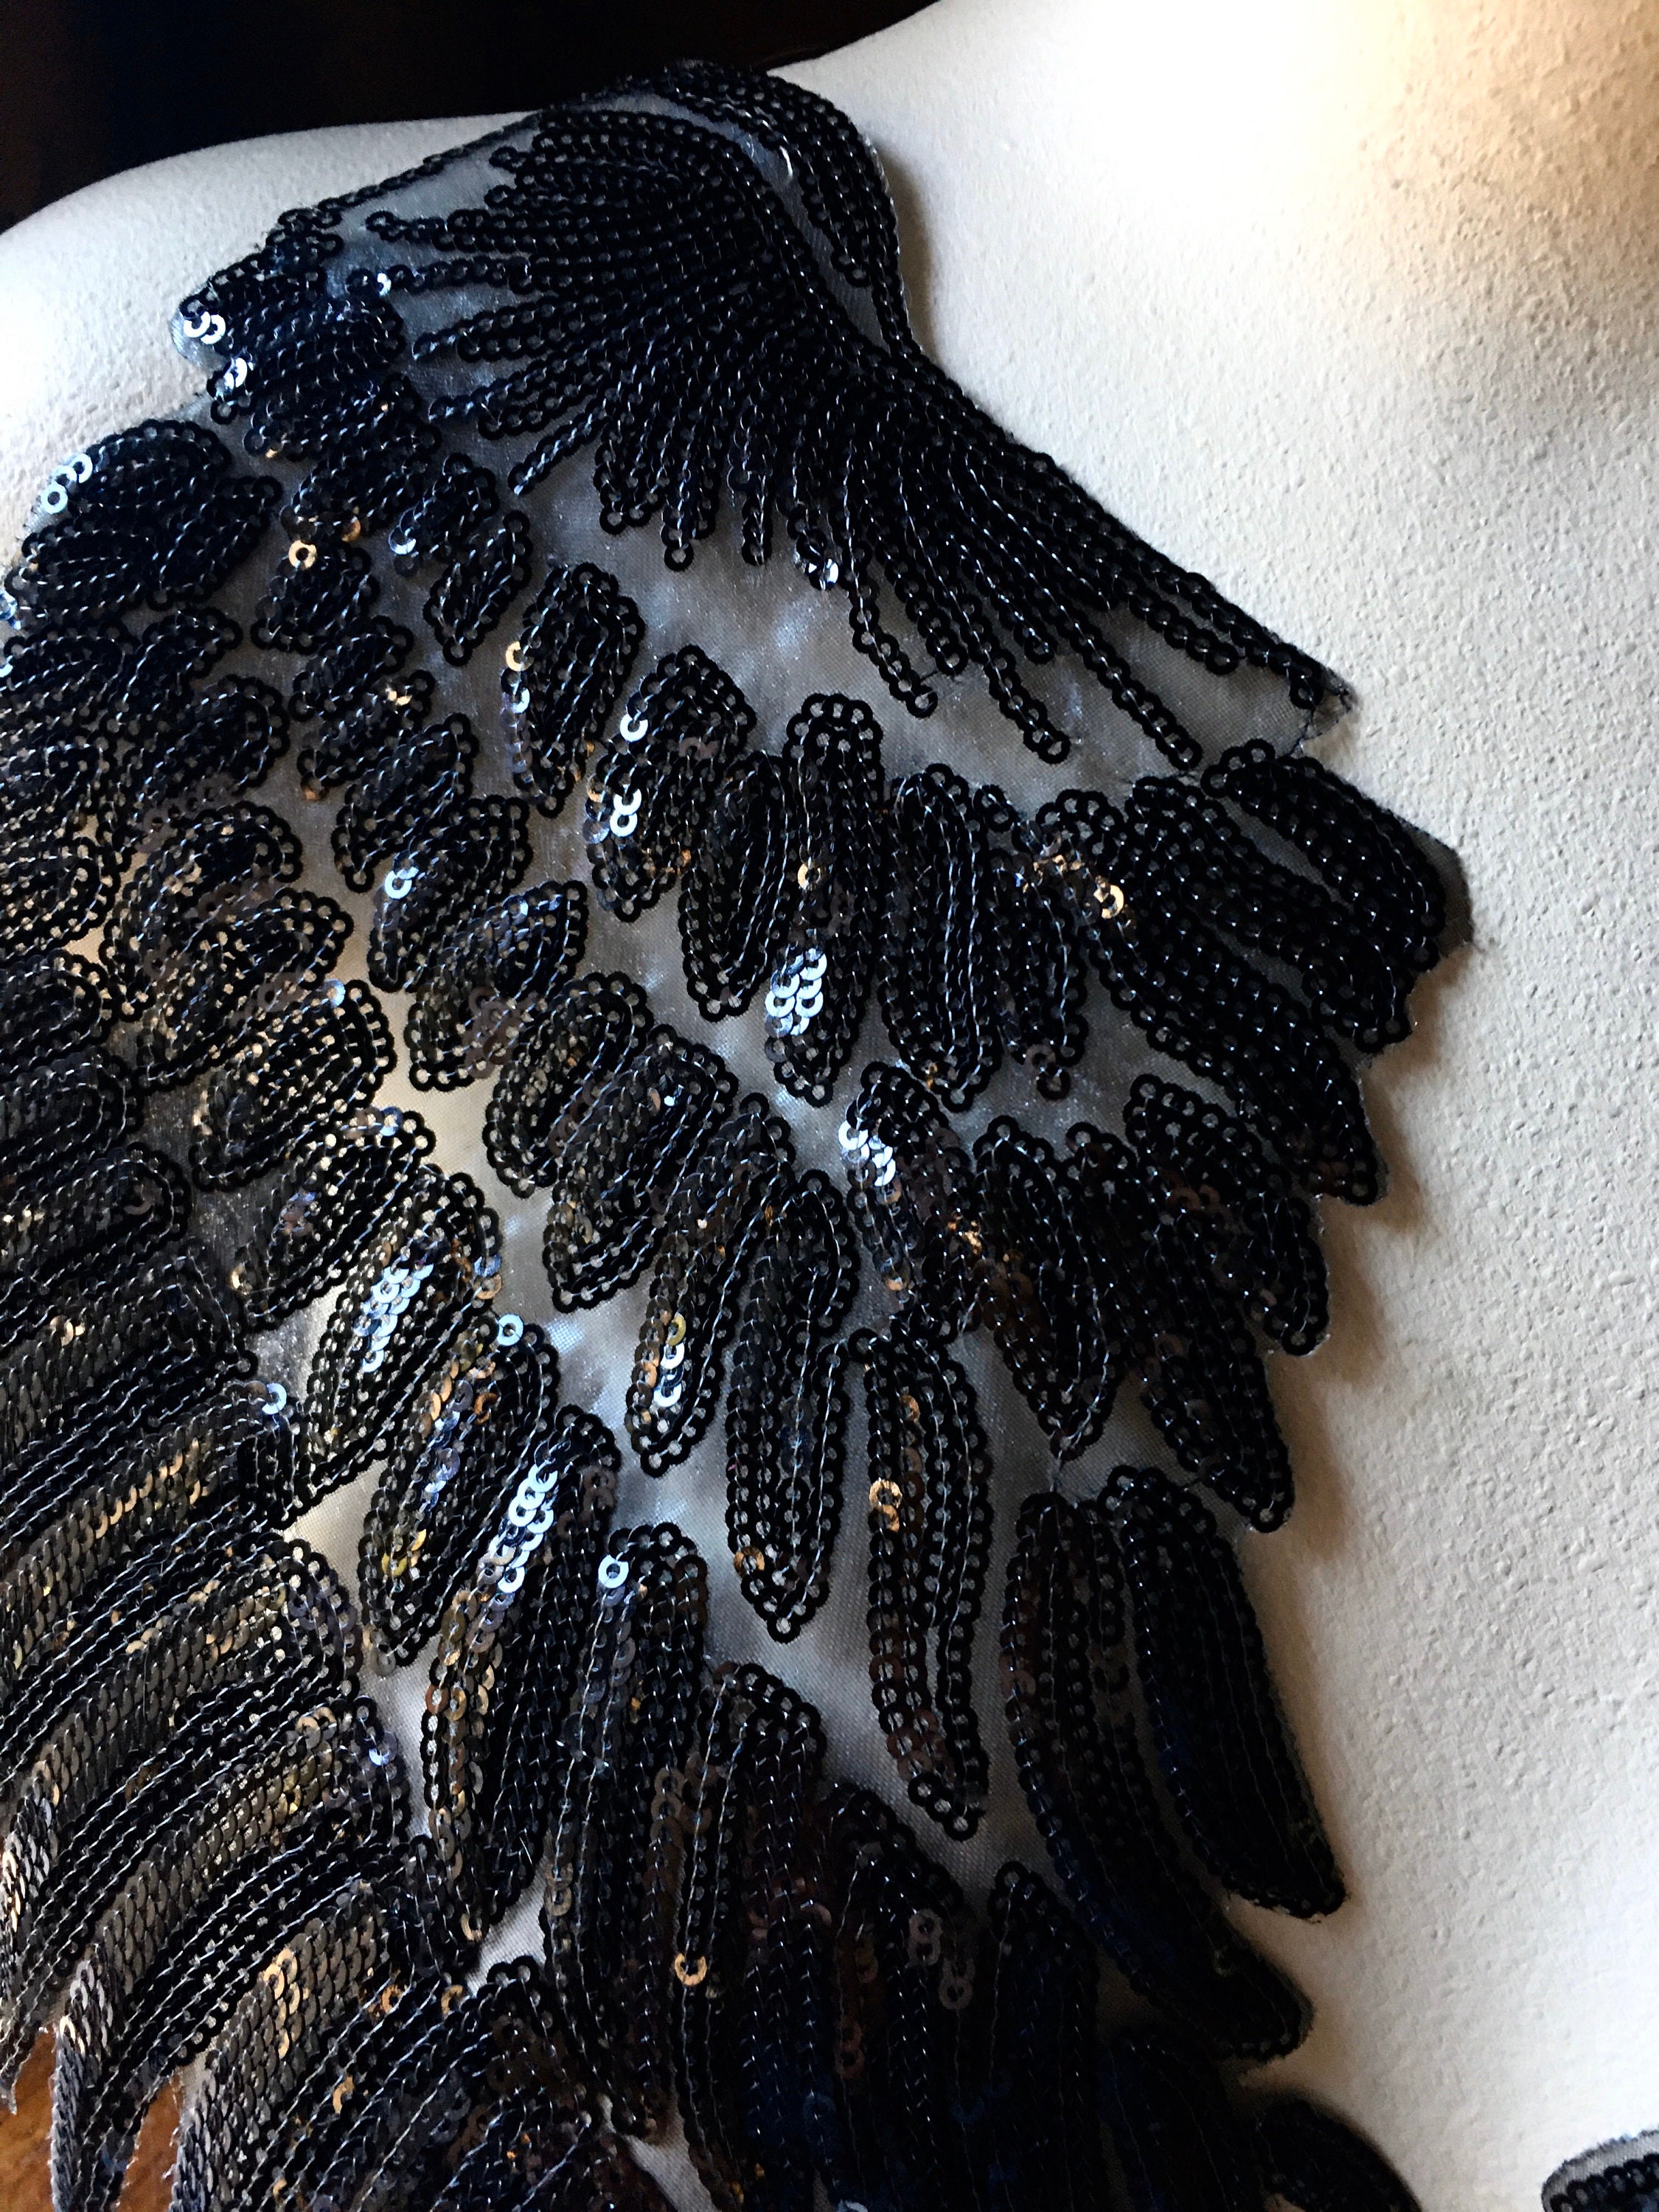 BLACK Beaded WINGS Lace Applique Pair for Lyrical Dance | Etsy